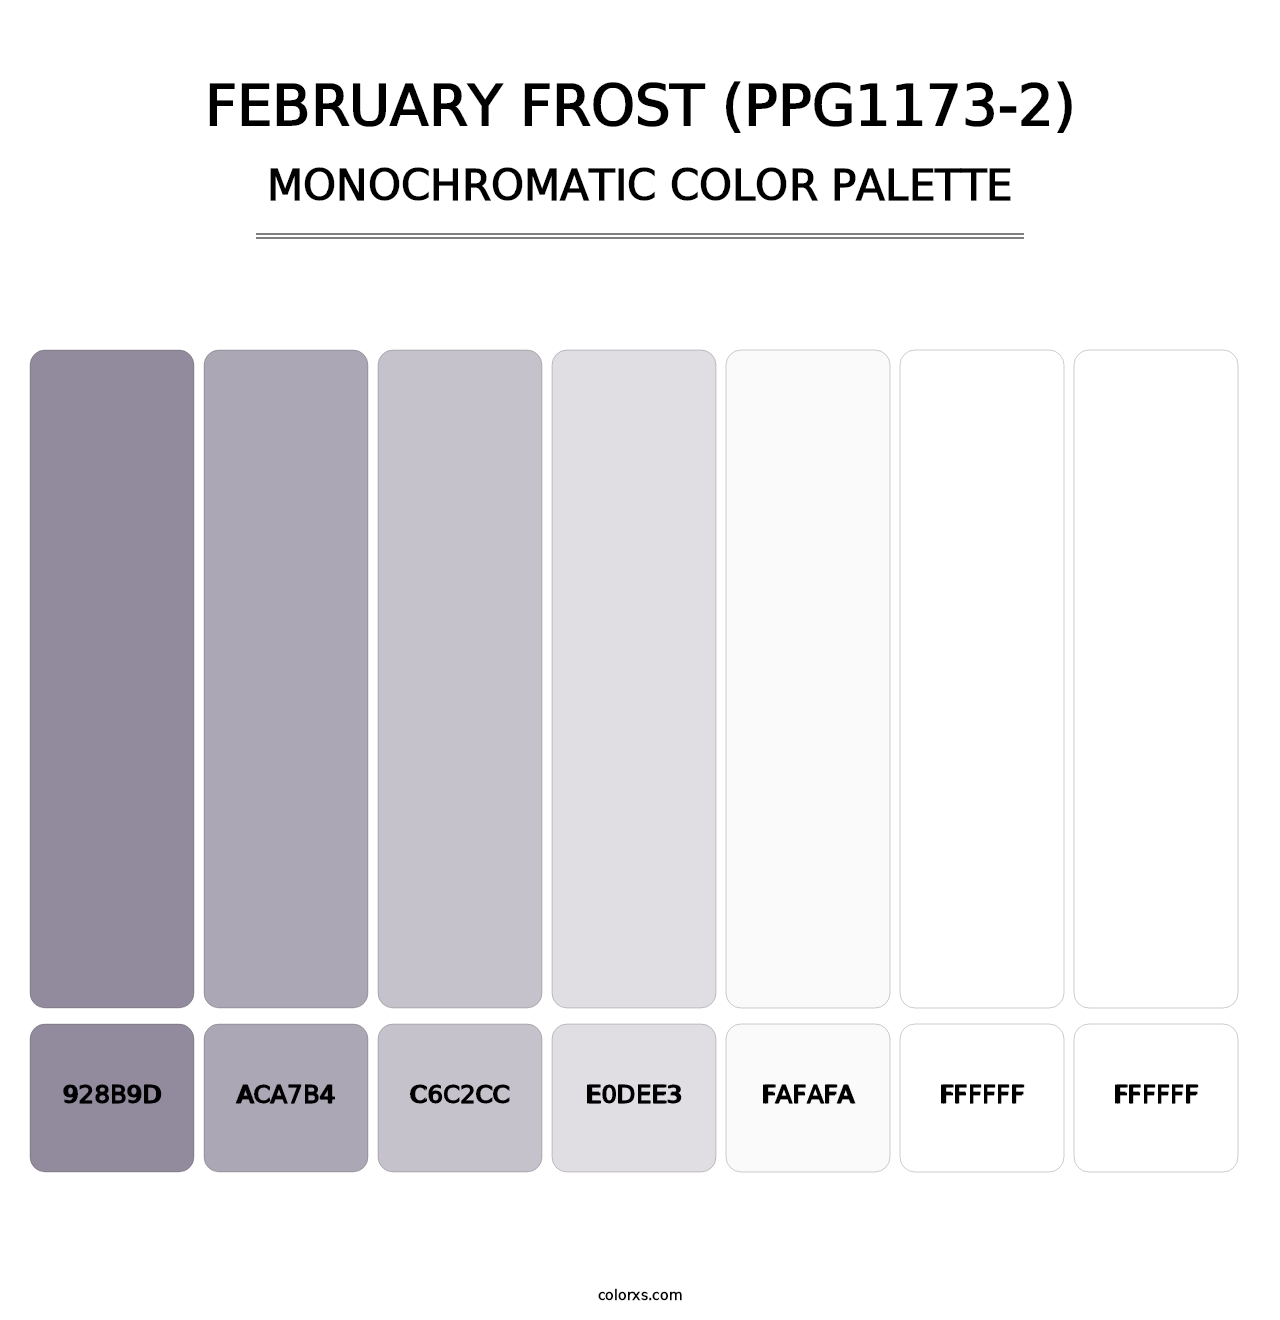 February Frost (PPG1173-2) - Monochromatic Color Palette